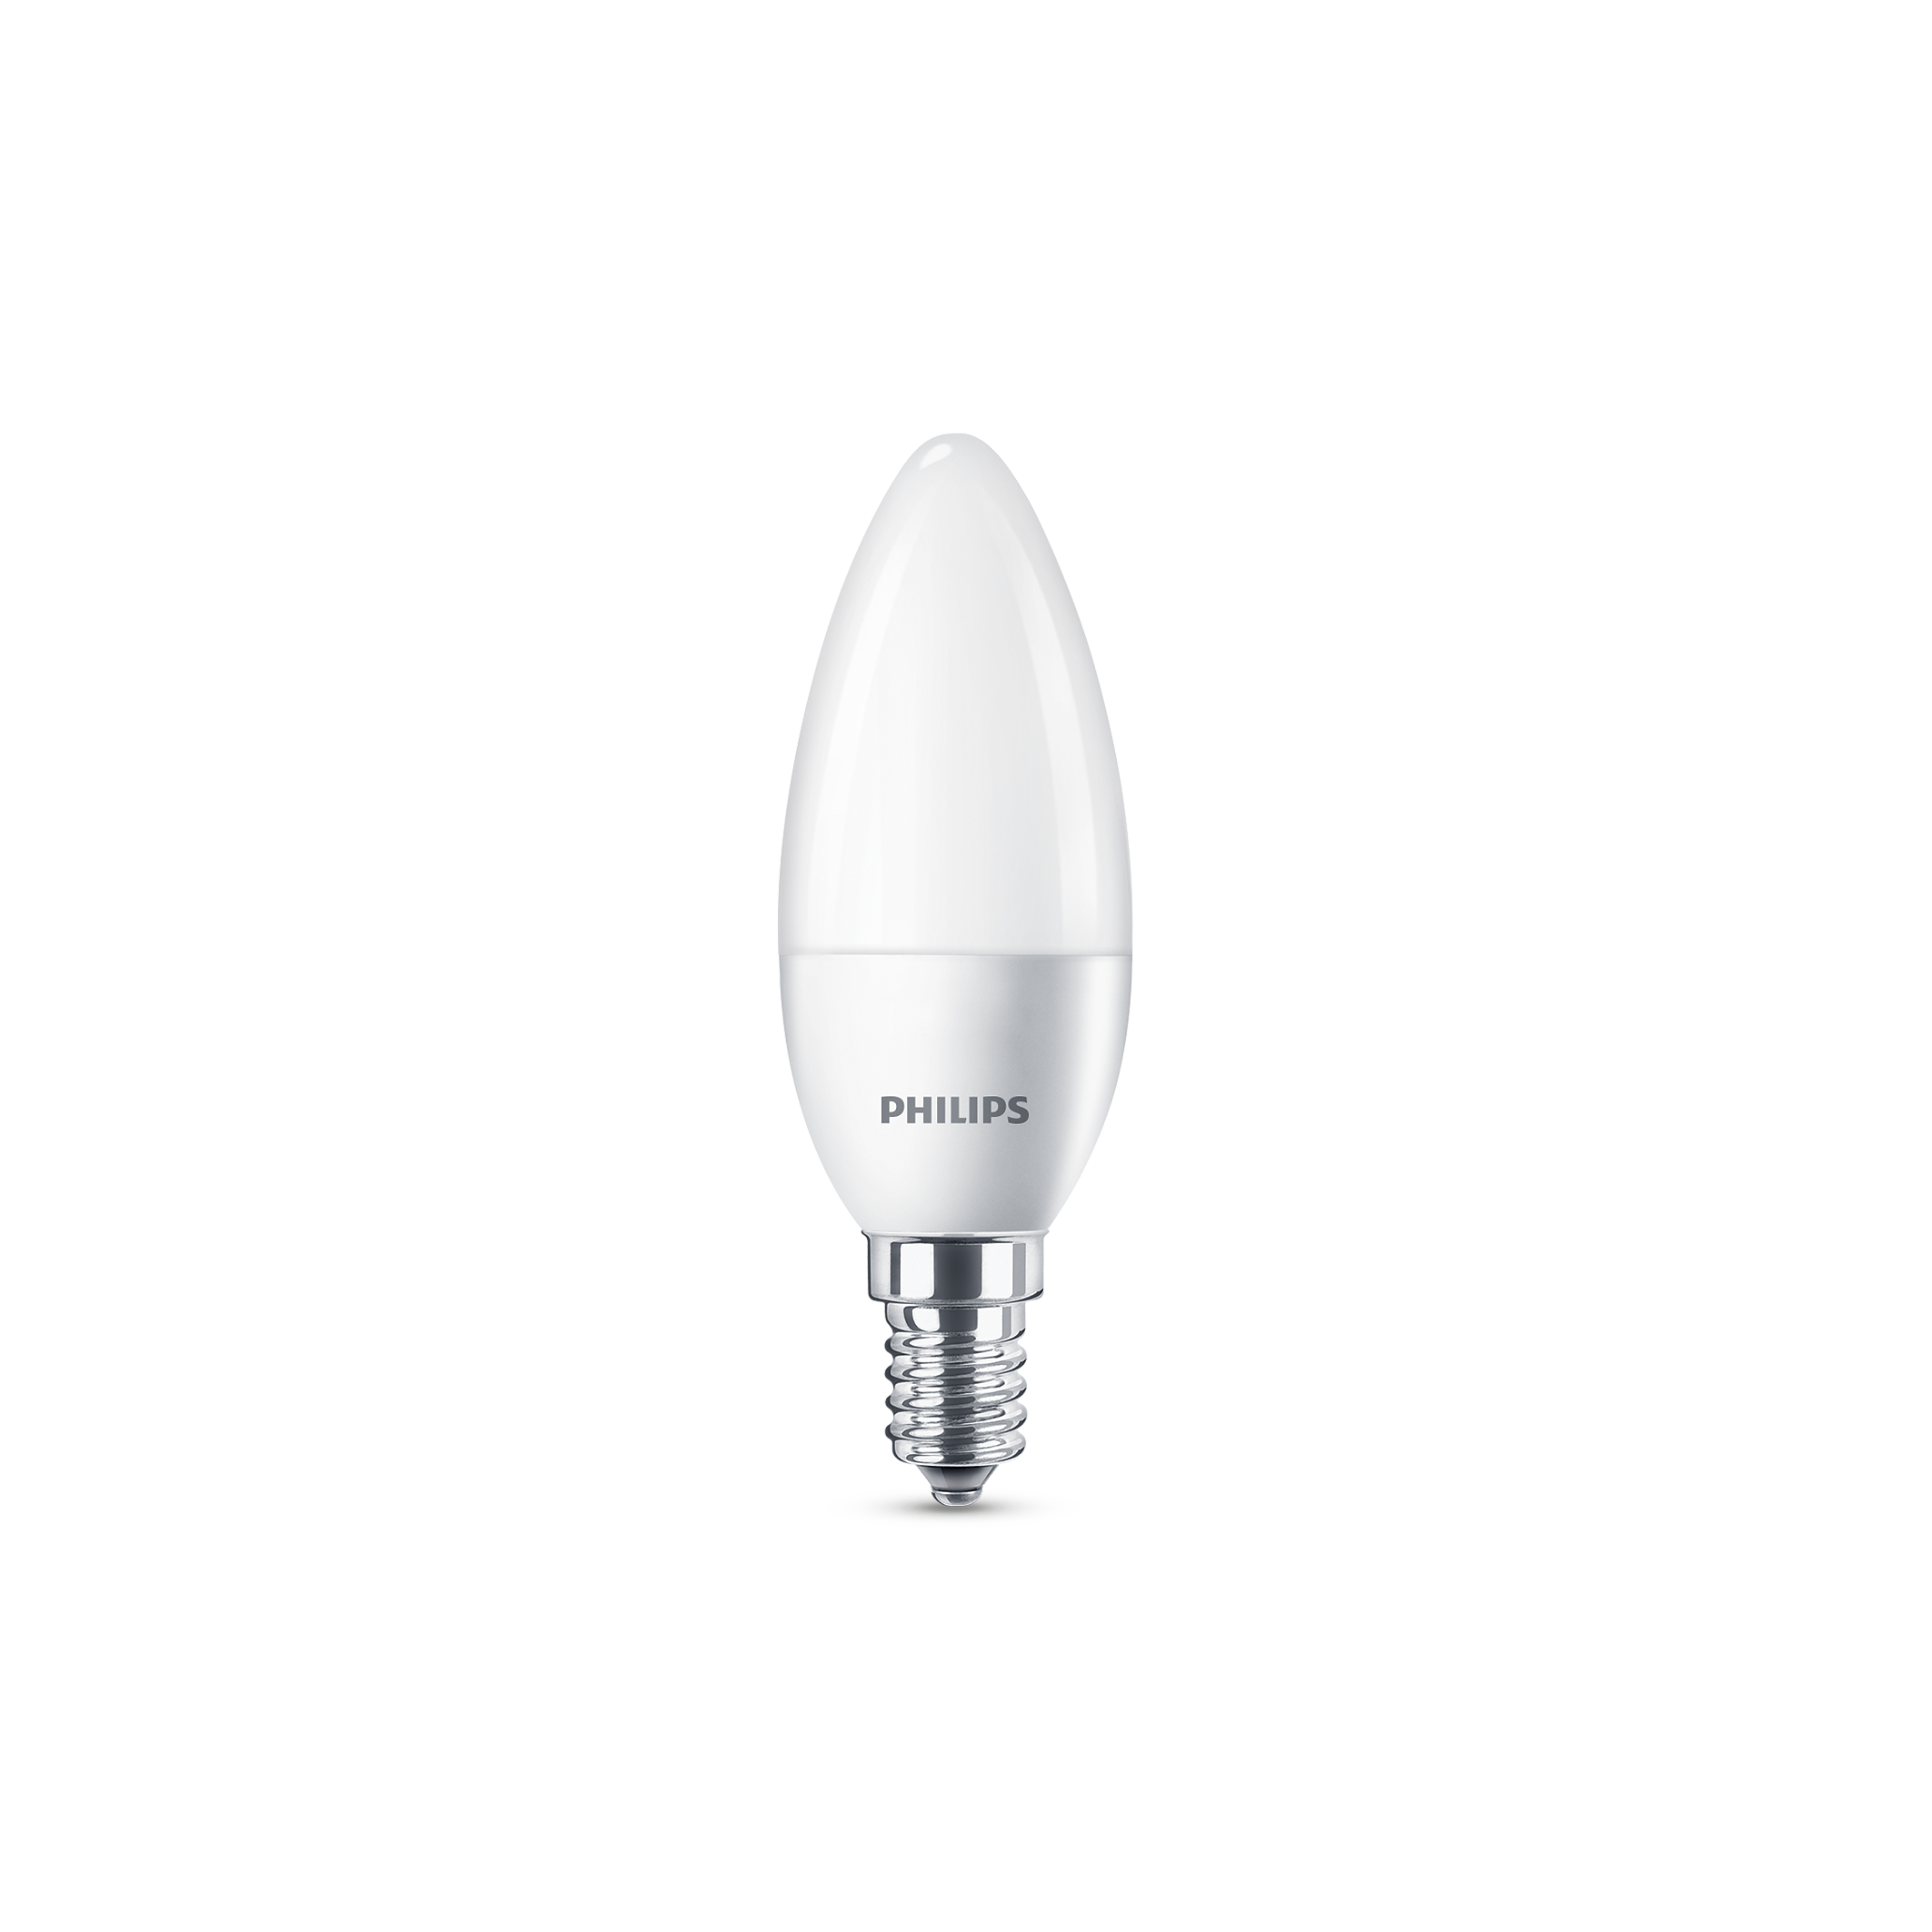 Includes SOL Notebook 6pk LED Candles Bulb E27 5W ES Large Screw Edison Energy Saver Bulb White Chandelier Lamp LED Candles Beacon E27 Candle Light Bulb